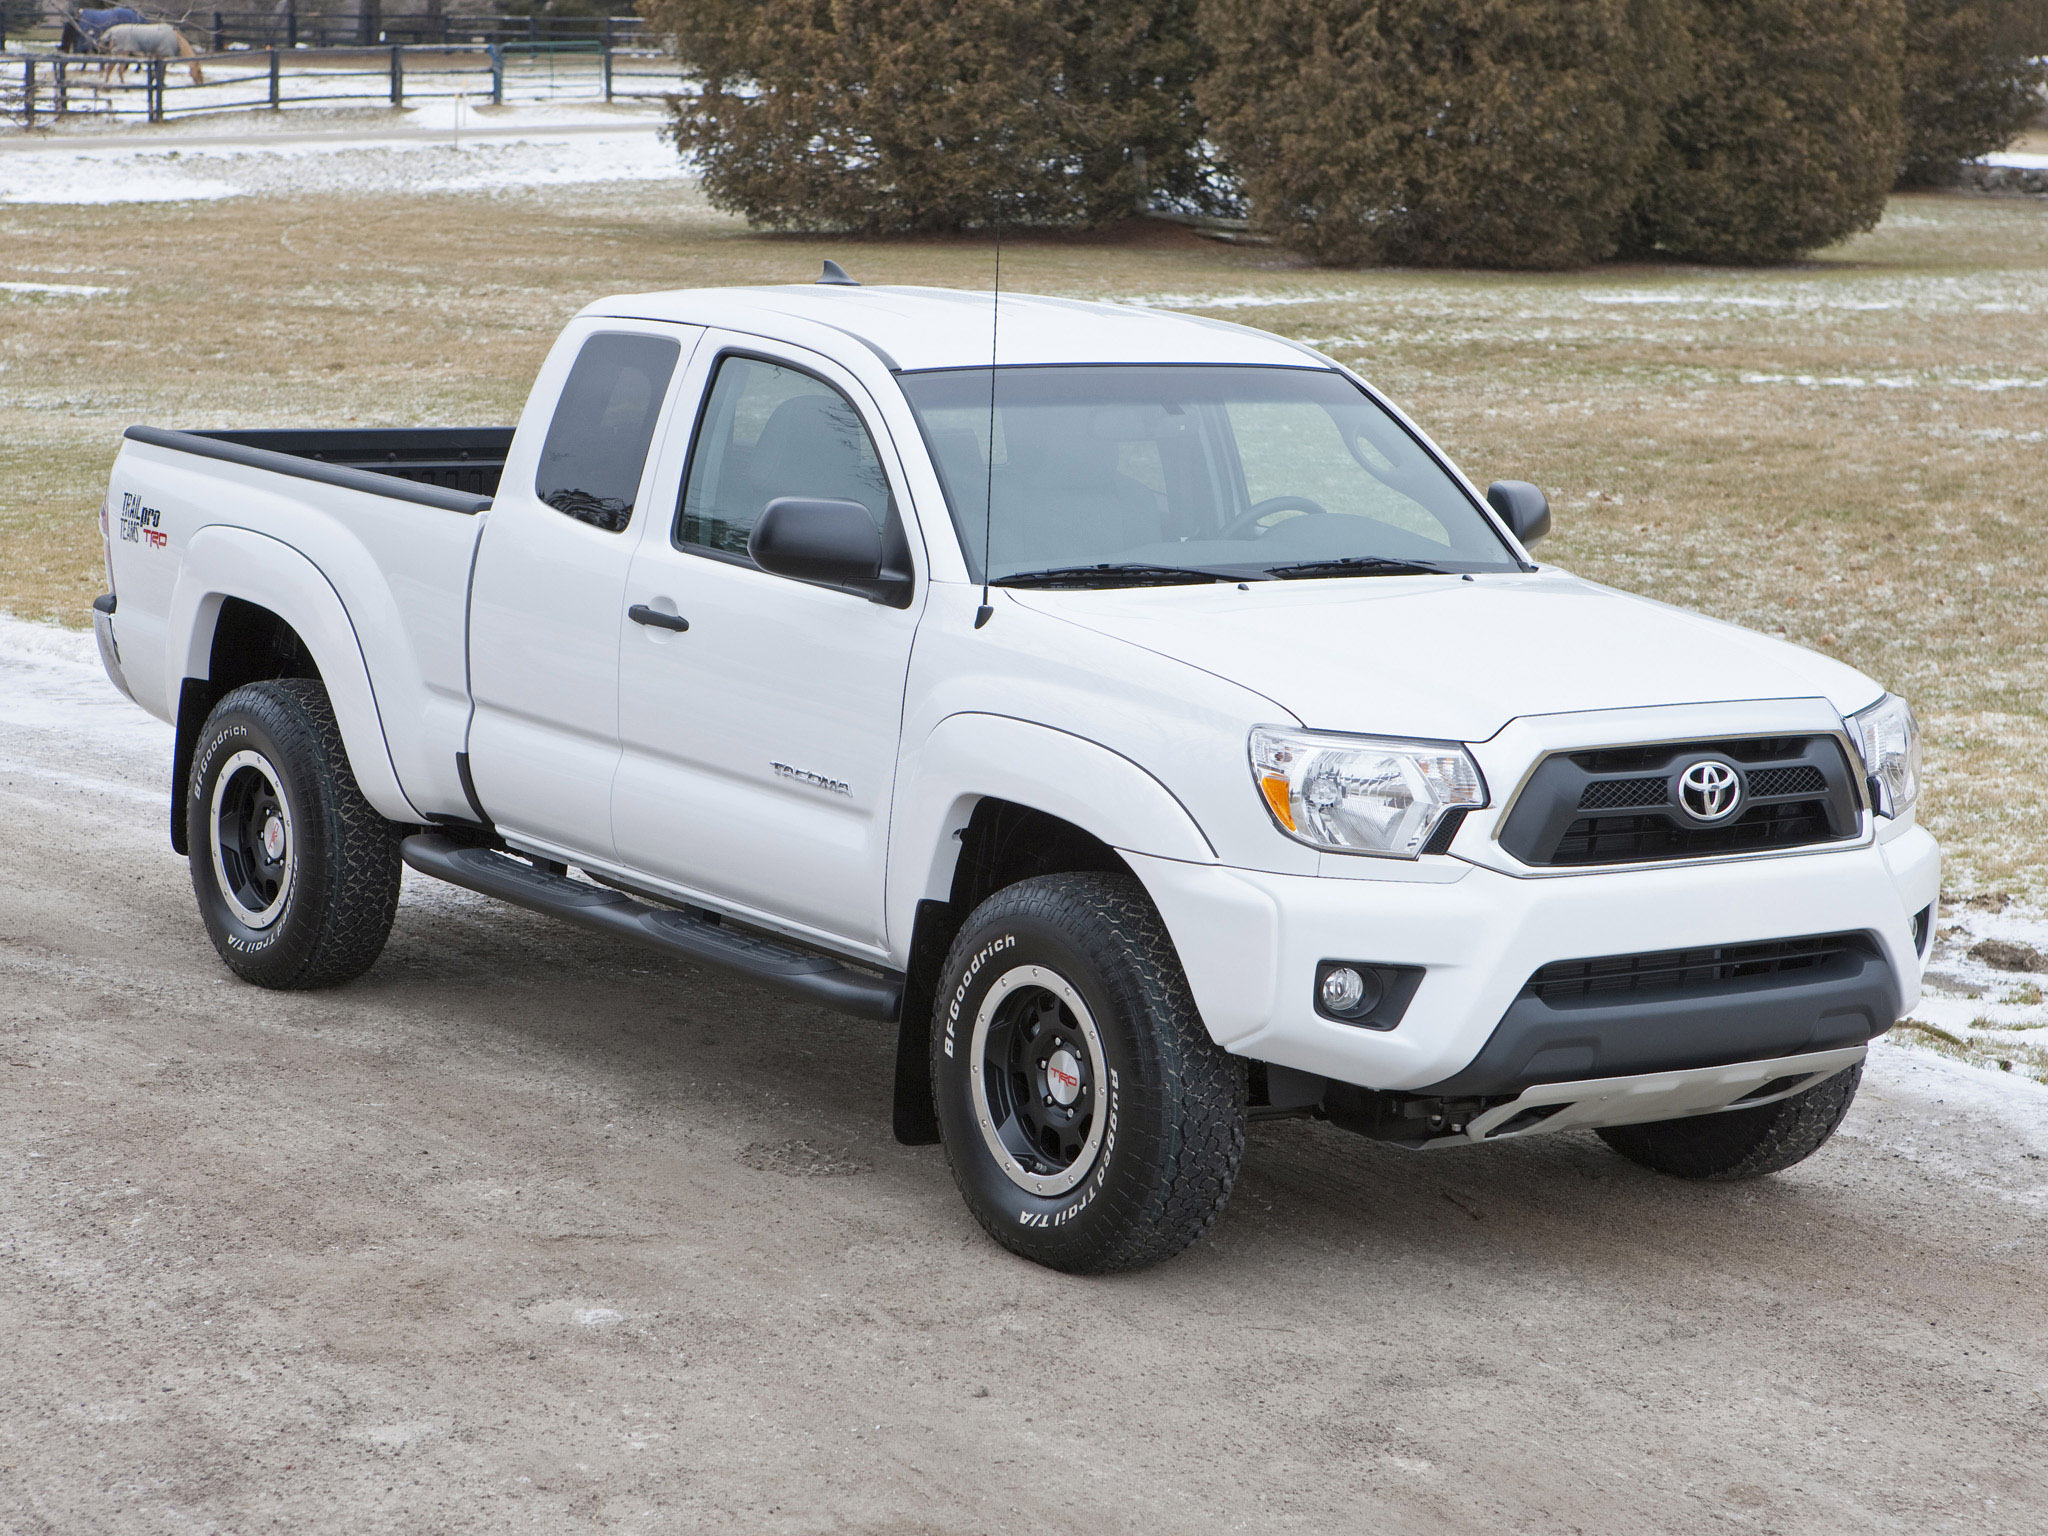 What is an access cab on a toyota tacoma